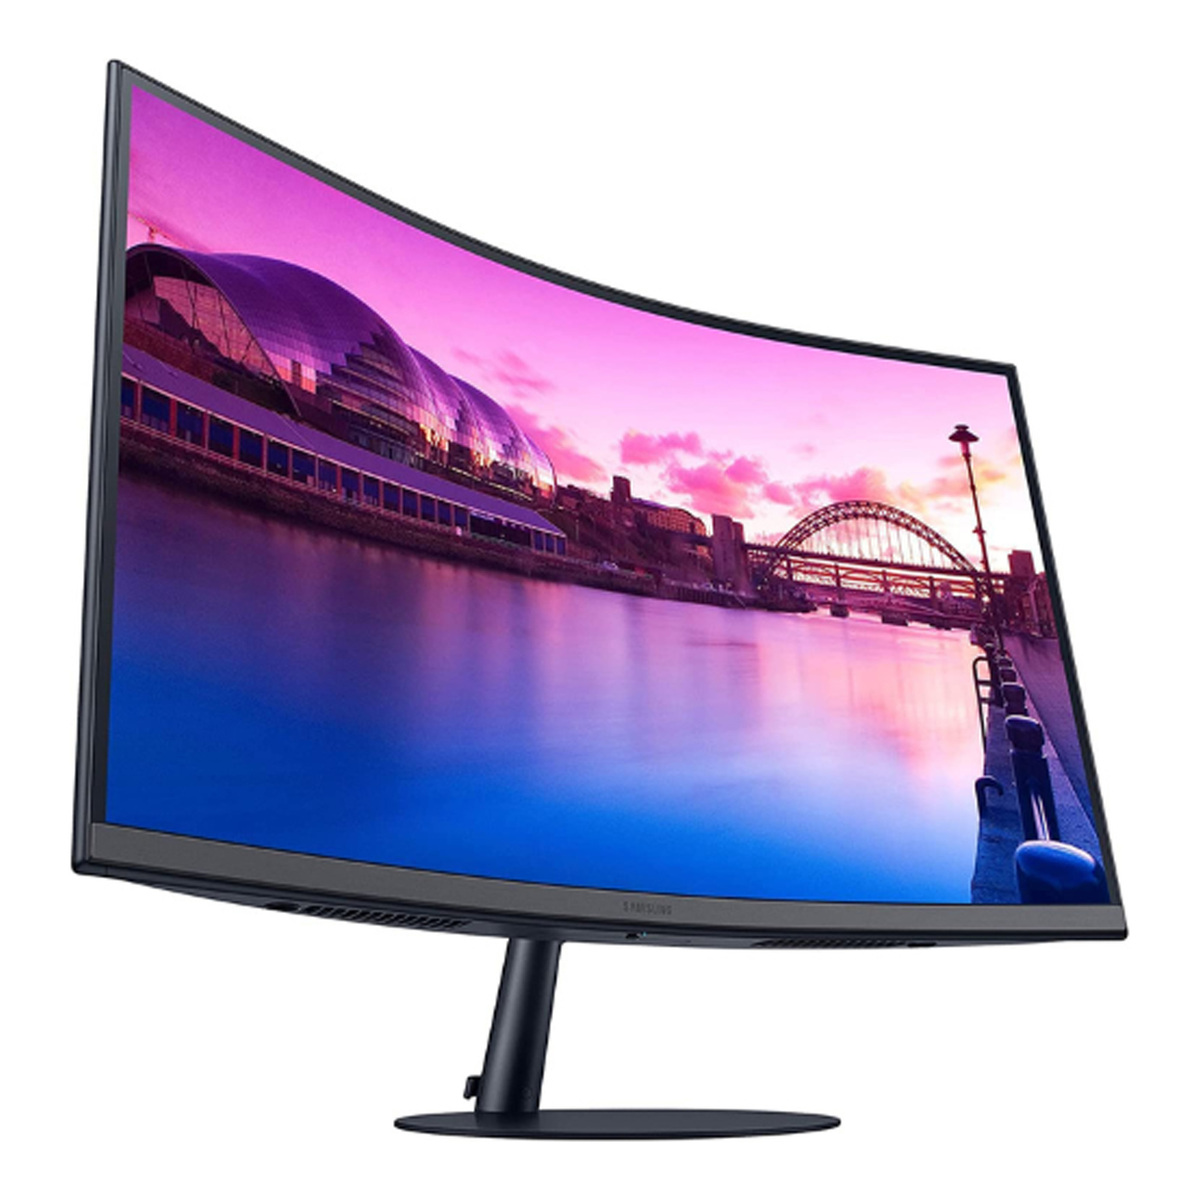 Samsung Curved Monitor, 27 inches, LS27C390